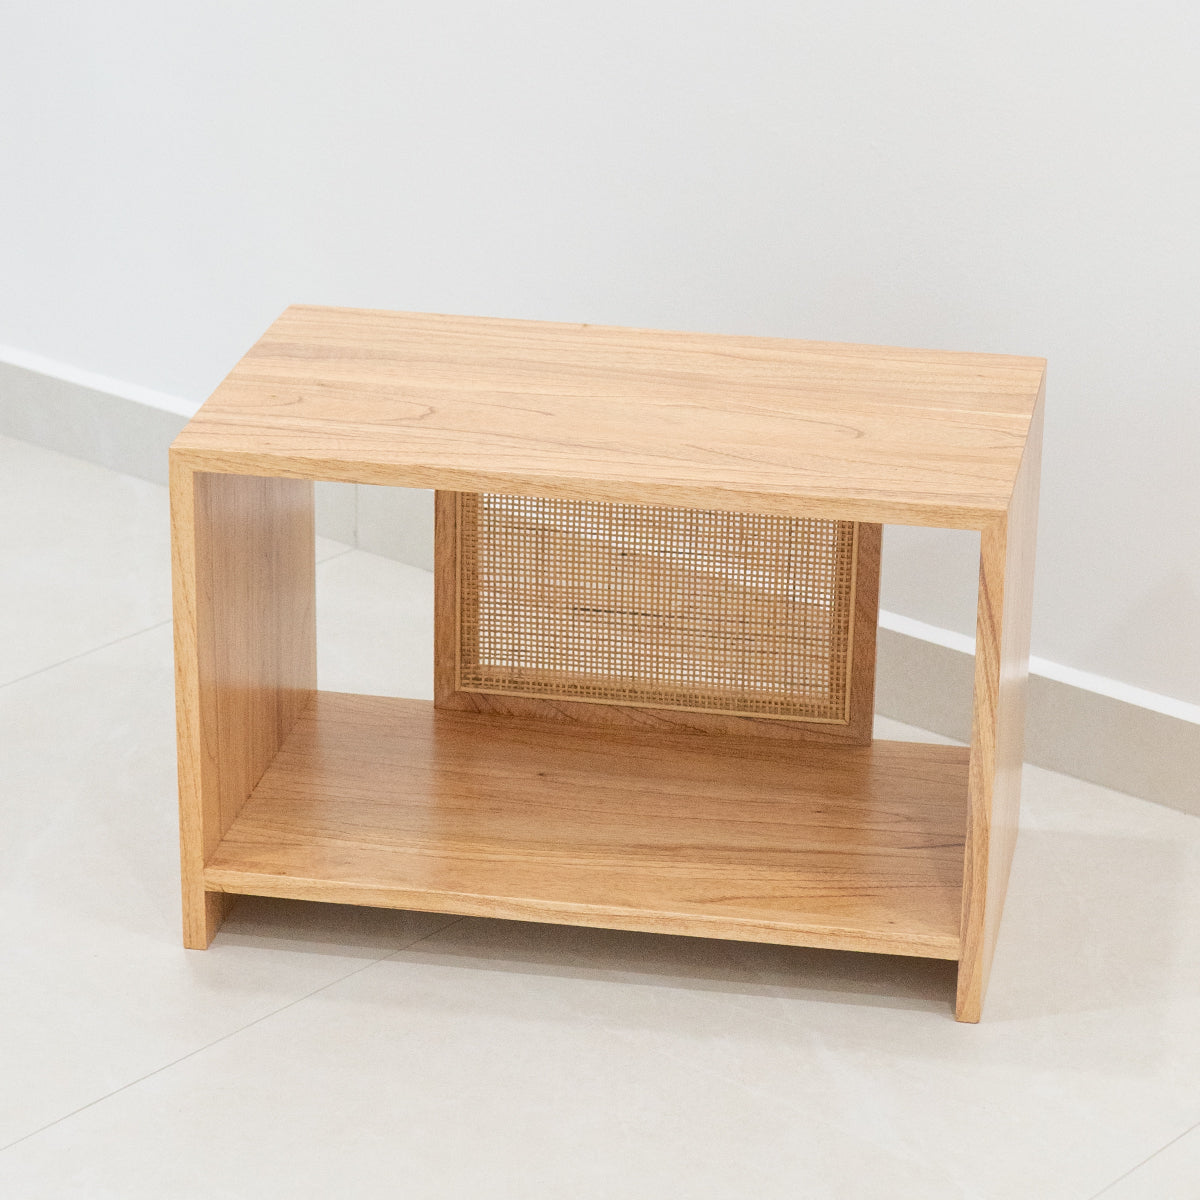 Summer's Modular Stackable Storage & Display Case (Medium With Legs) | Shop Furniture Online On Kathy's Cove Singapore